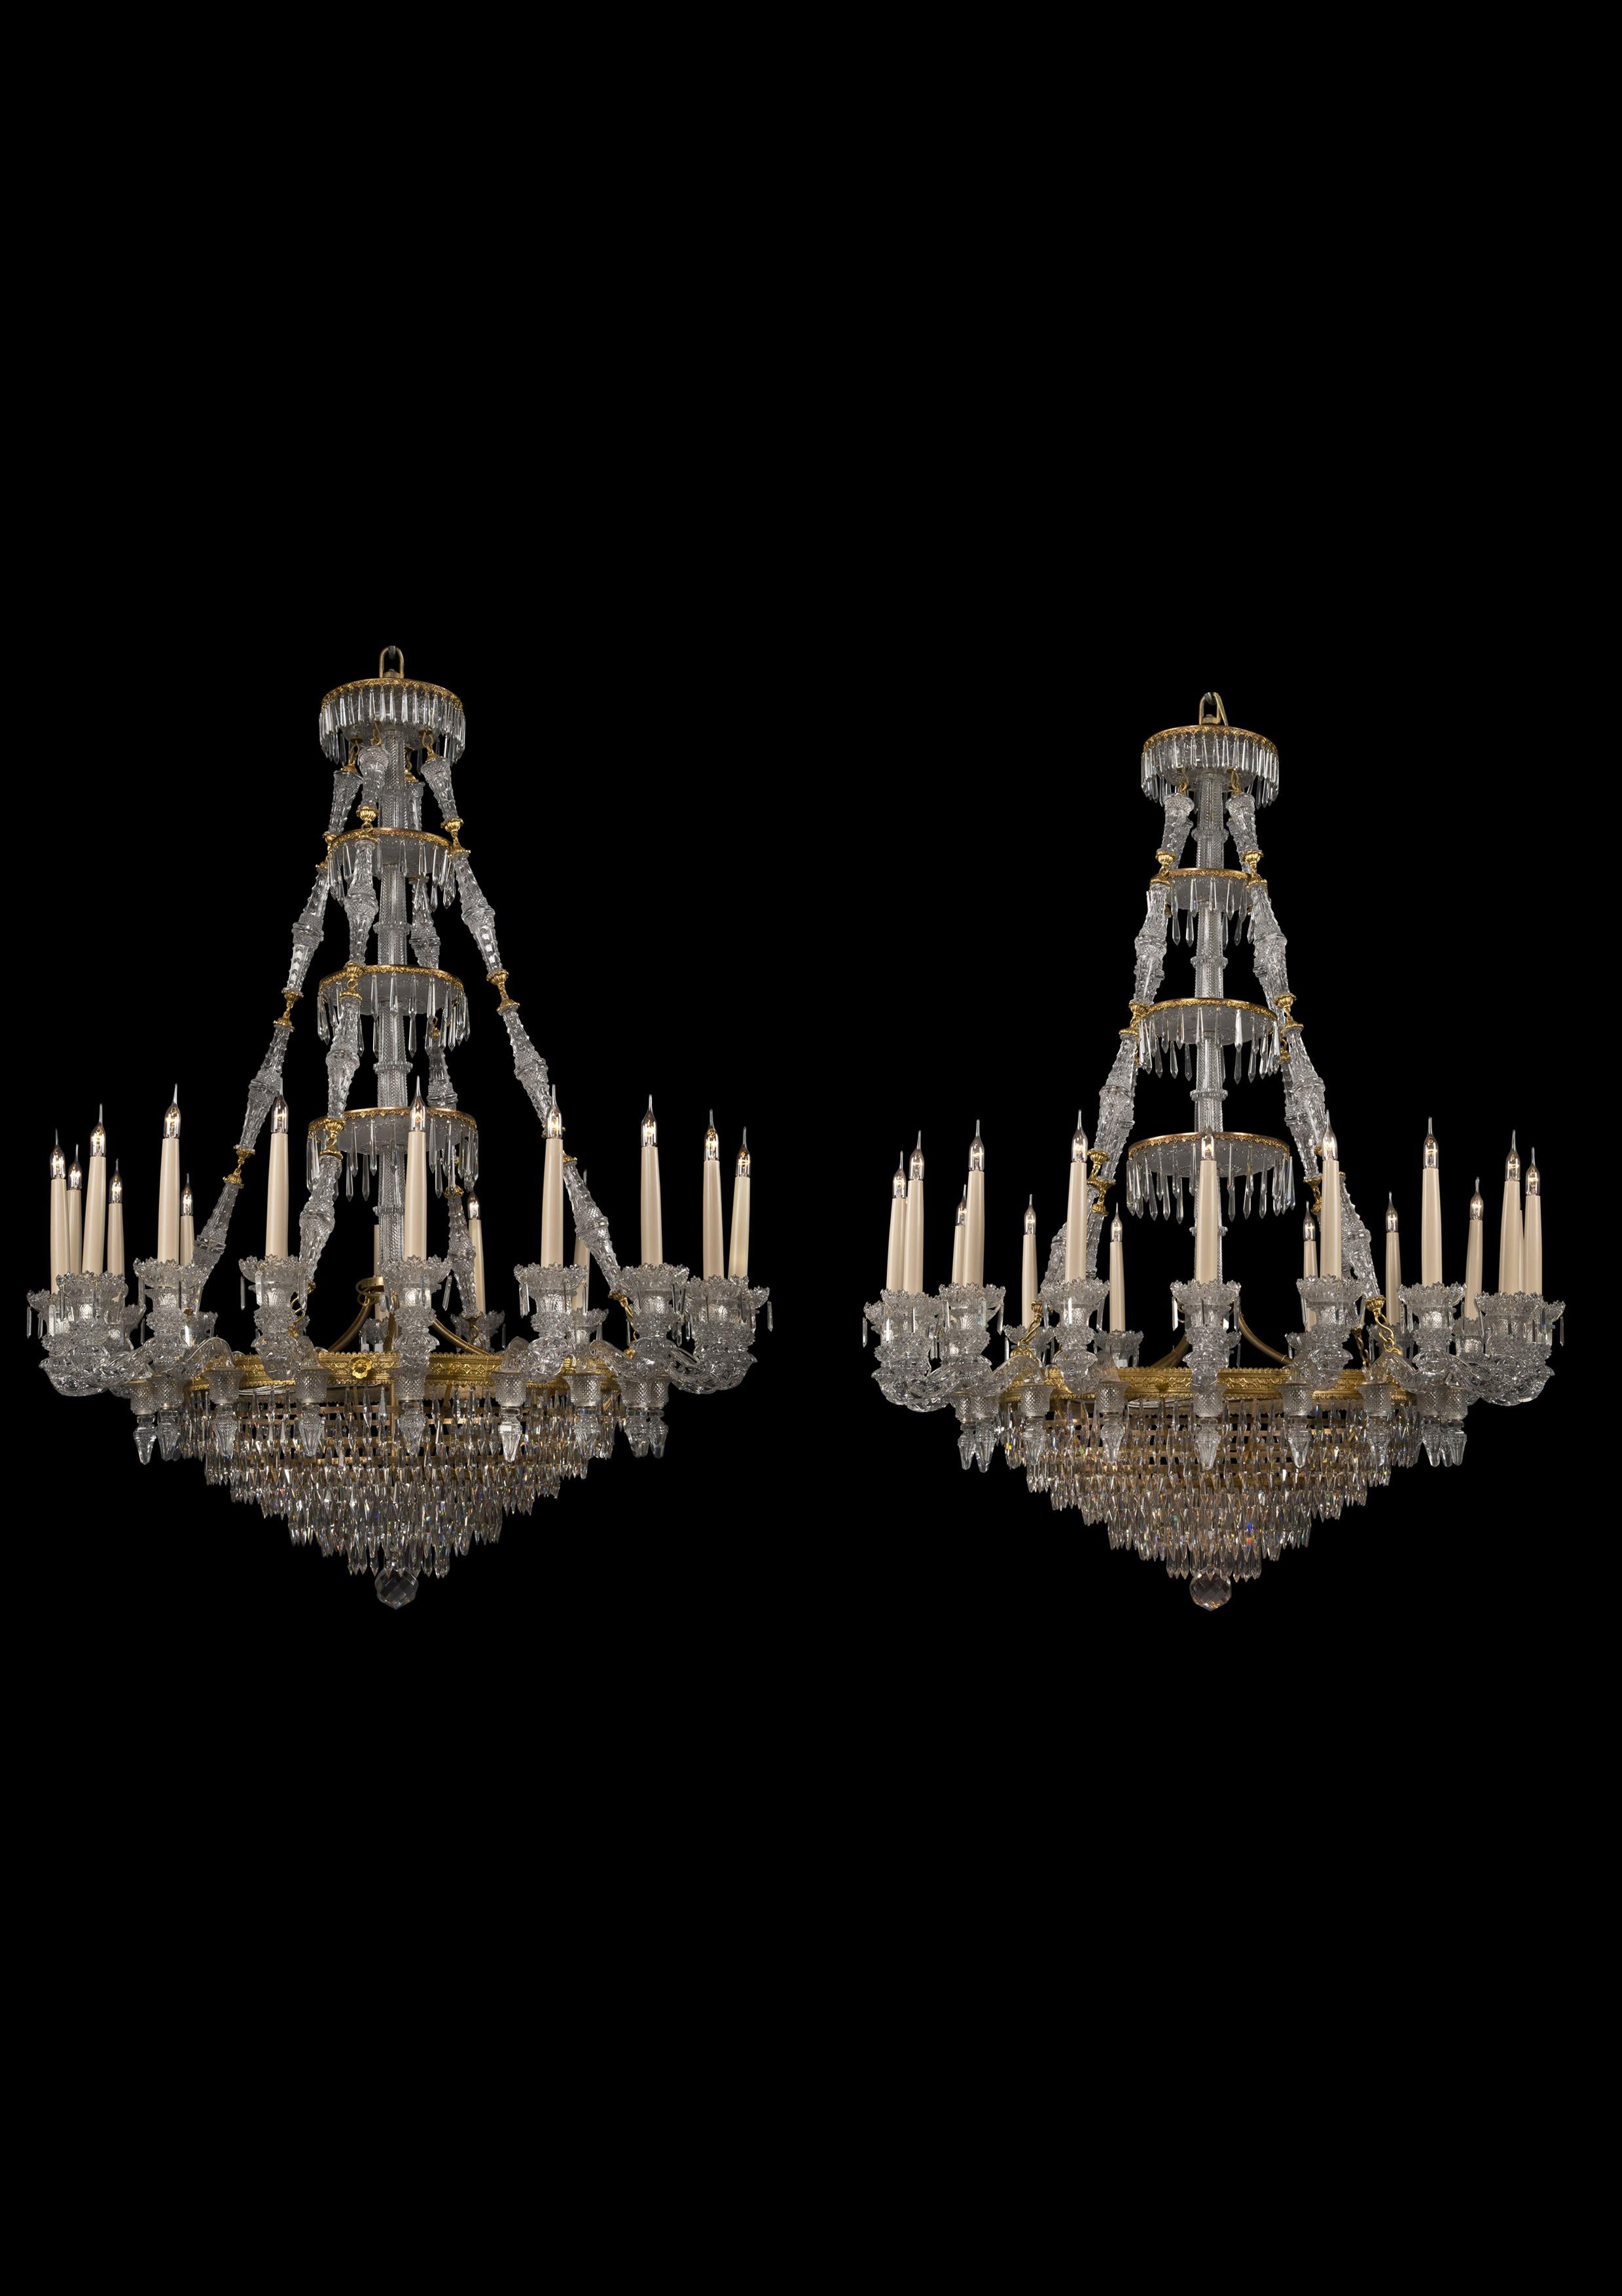 An important pair of eighteen-light gilt bronze and engraved glass chandeliers, by La Compagnie des Cristalleries de Baccarat.

French, circa 1860.

Weight 30kg / 66.1lbs.

Baccarat is the world's leading manufacturer of crystalware. Founded